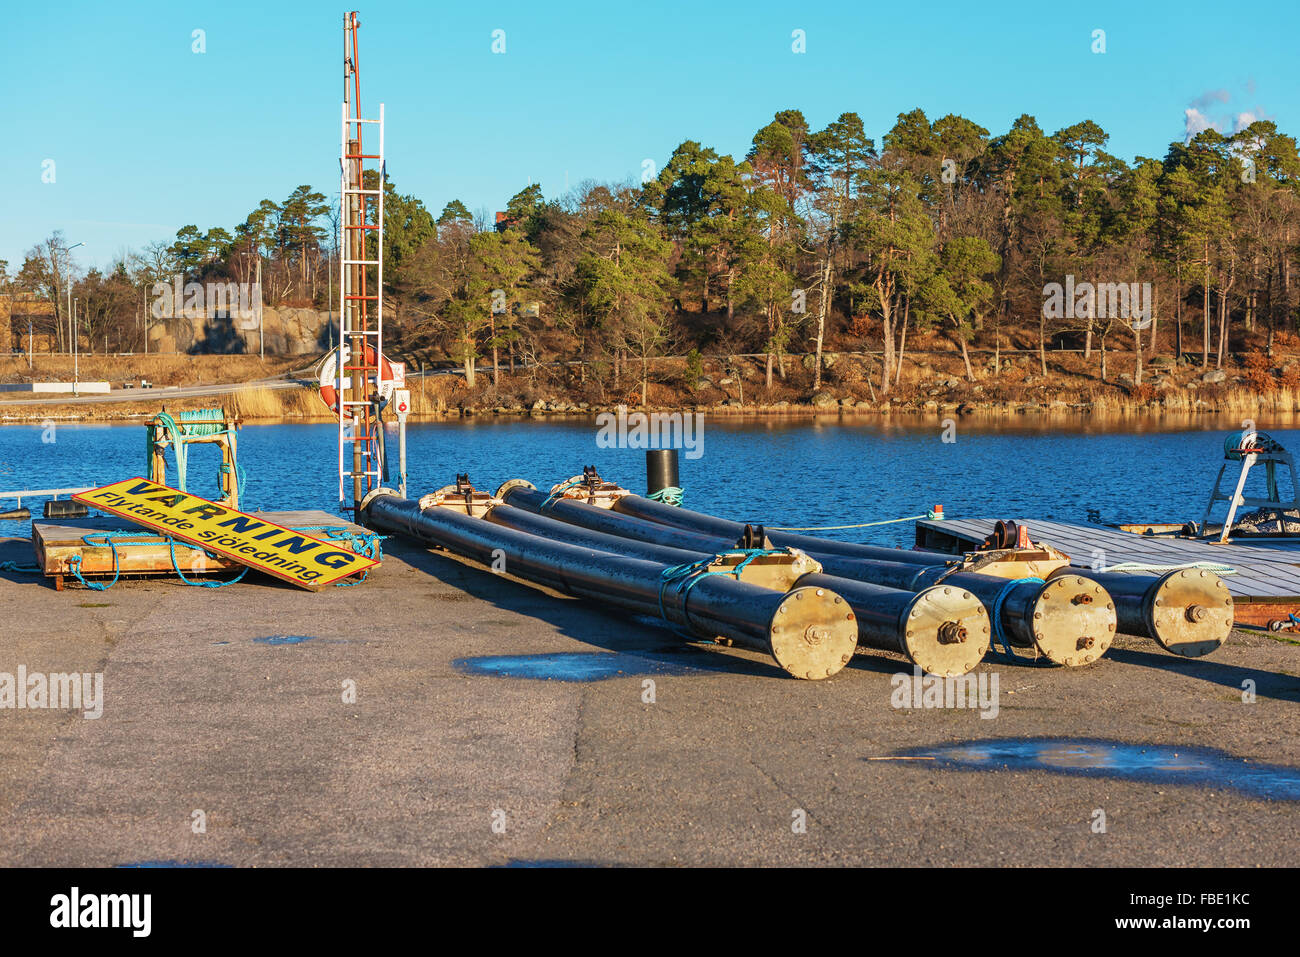 Karlskrona, Sweden - January 13, 2016: Sea cable housing tubes on the dockside in a coastal bay waiting to be deployed at sea. W Stock Photo